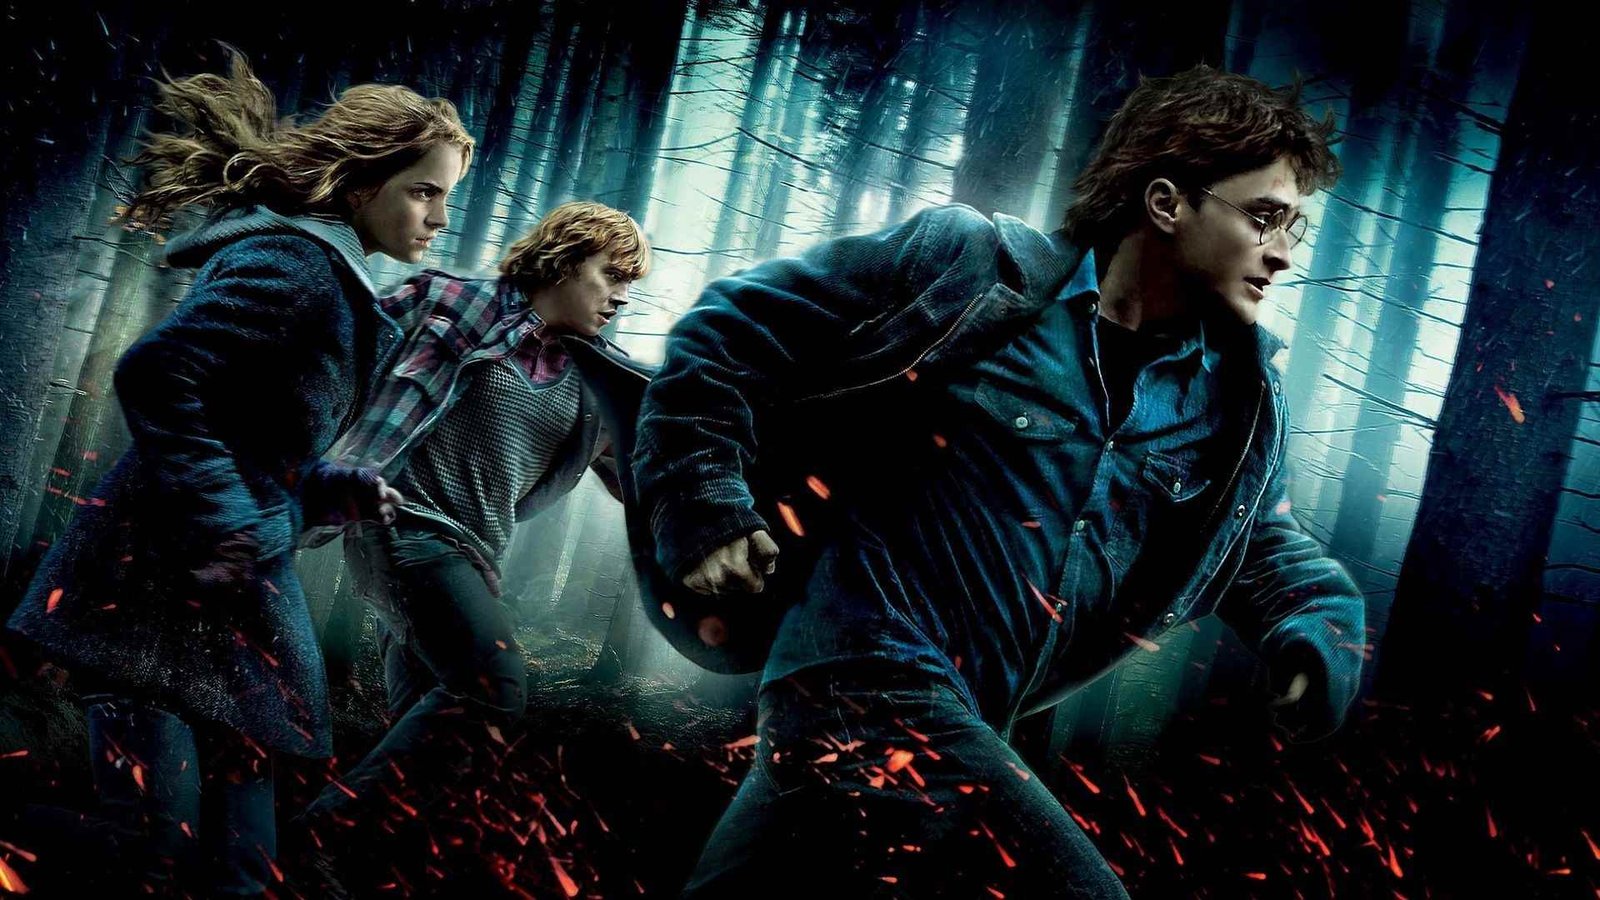  / Harry Potter and the Deathly Hallows: Part 1